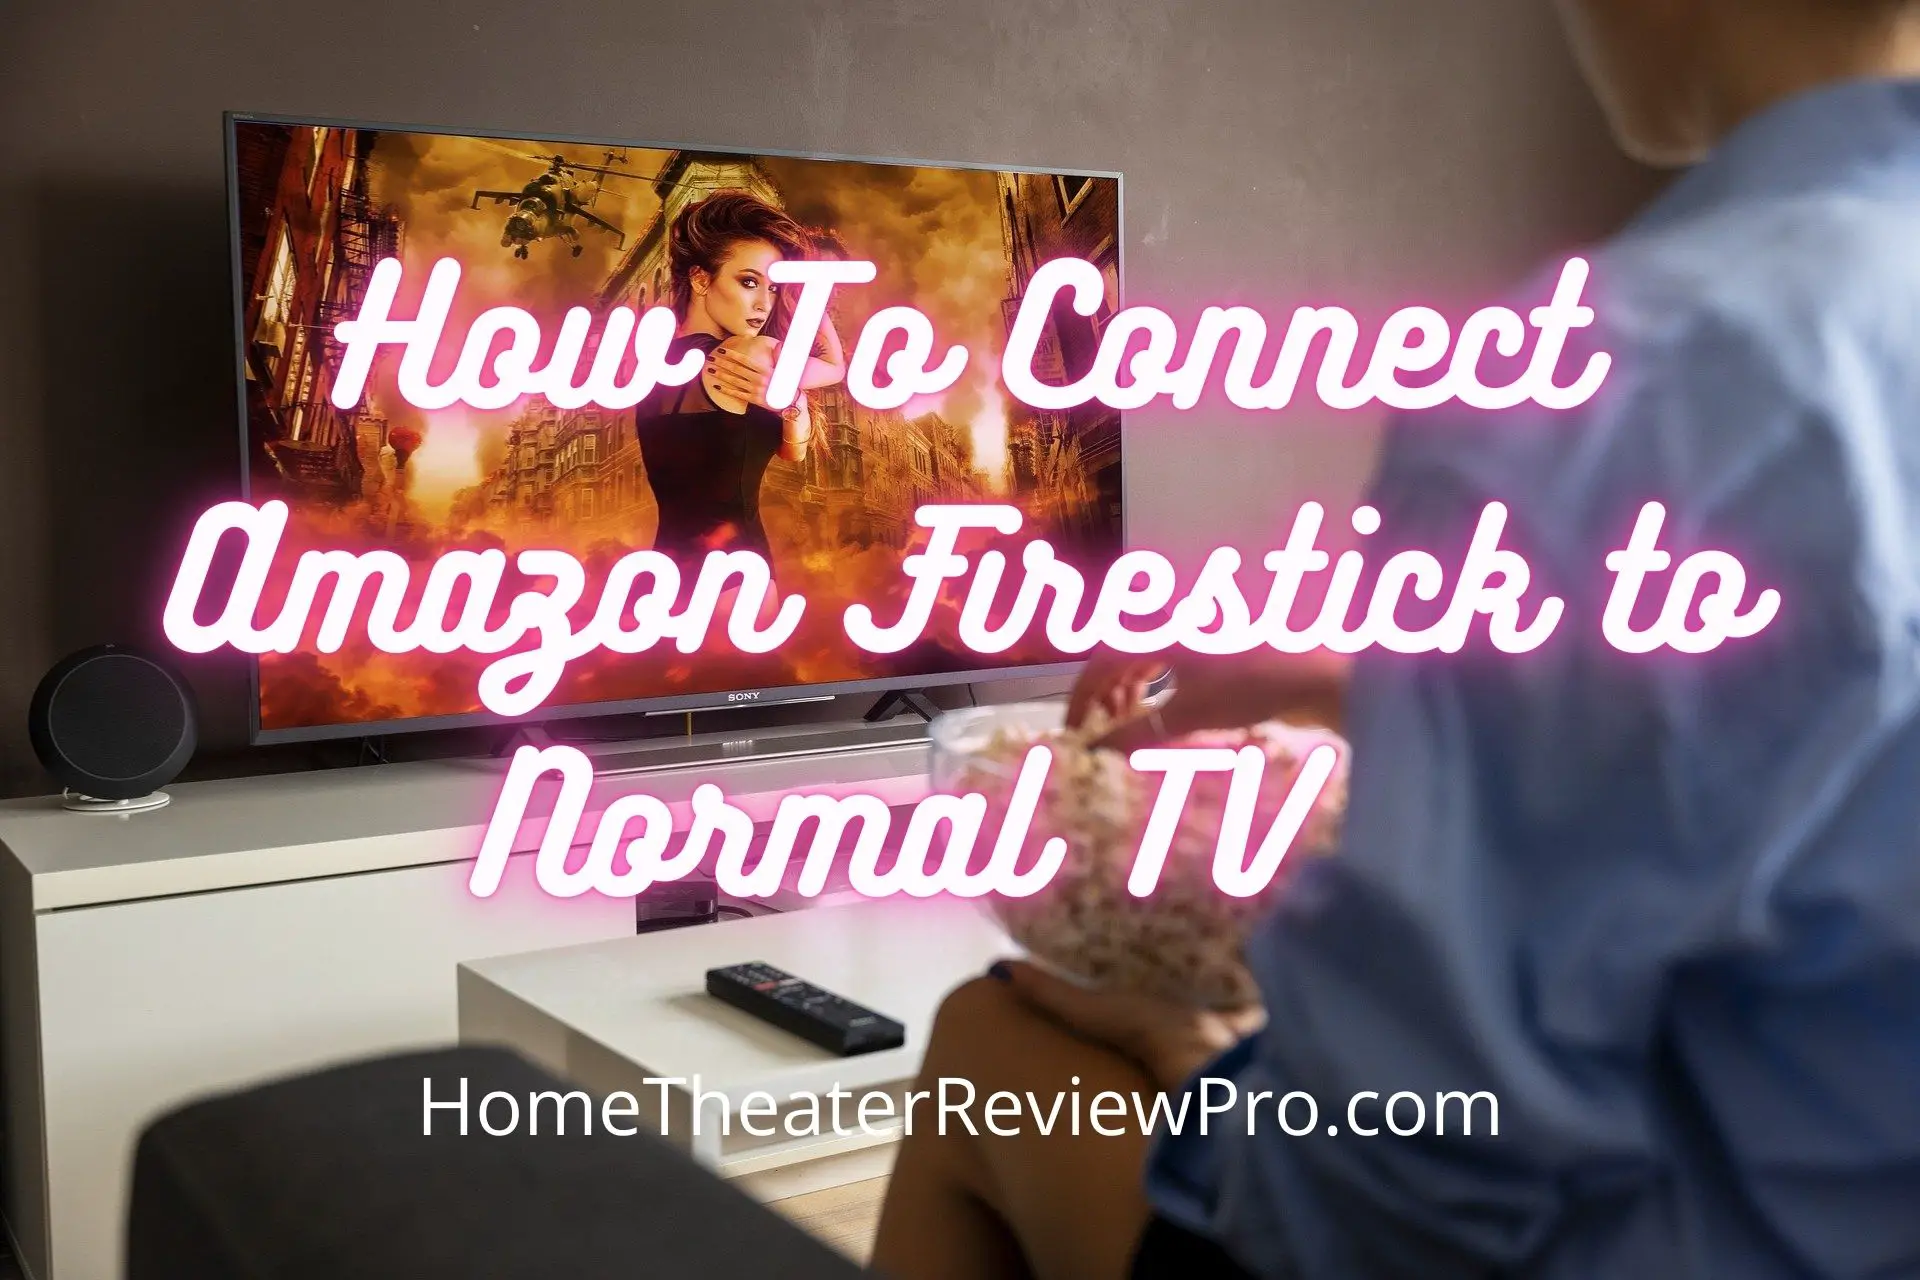 How To Connect Amazon Firestick to Normal TV